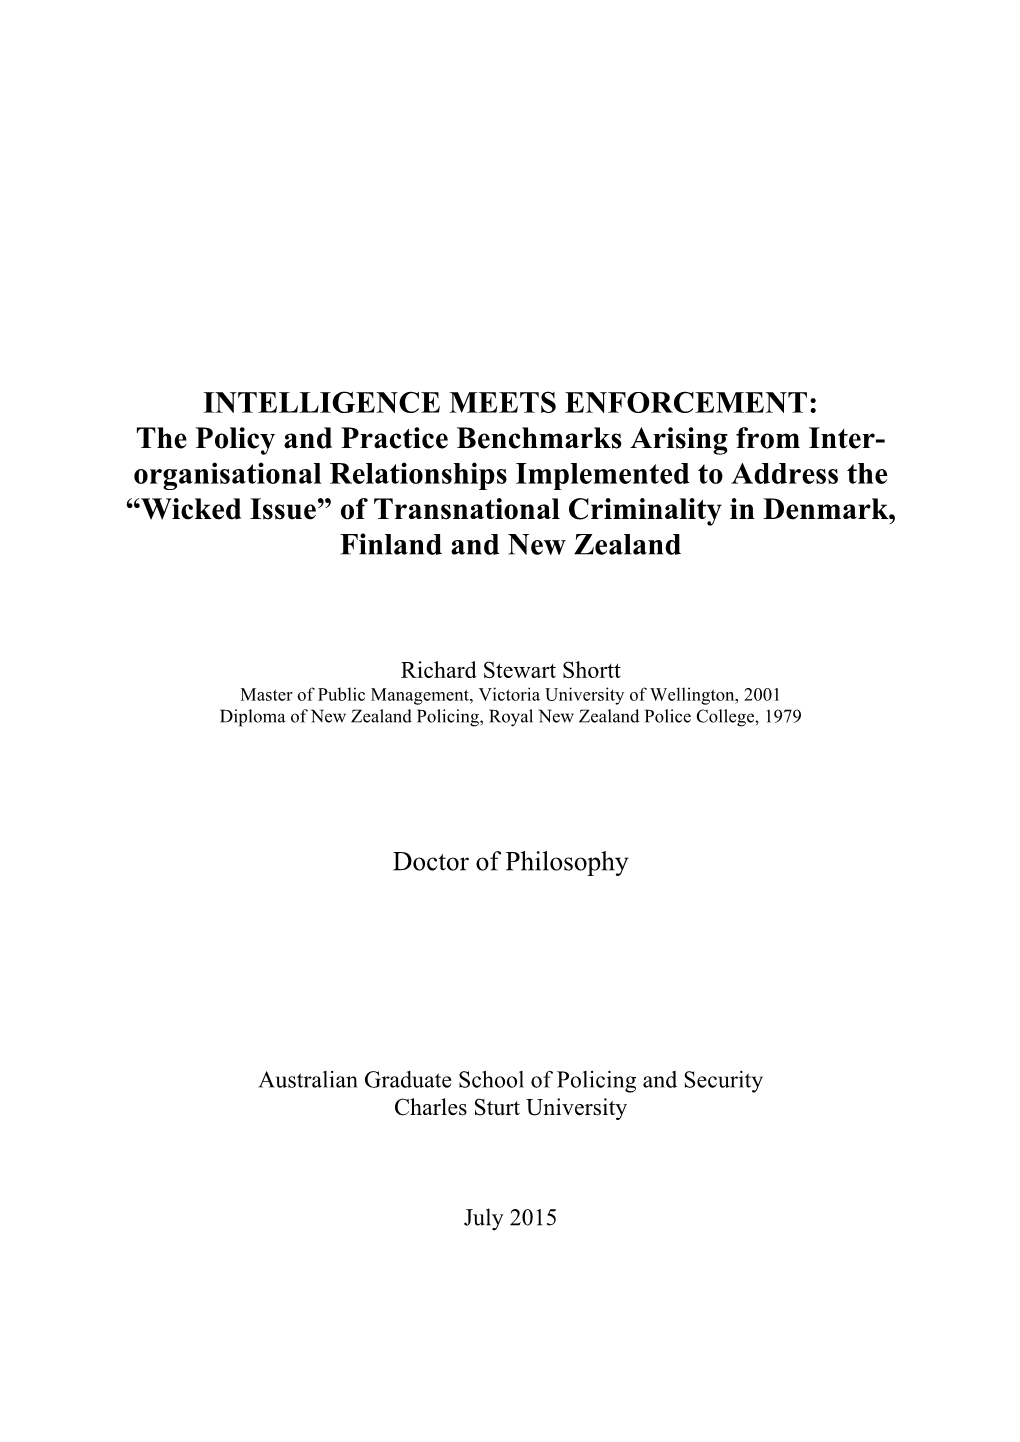 INTELLIGENCE MEETS ENFORCEMENT: the Policy and Practice Benchmarks Arising from Inter- Organisational Relationships Implemented